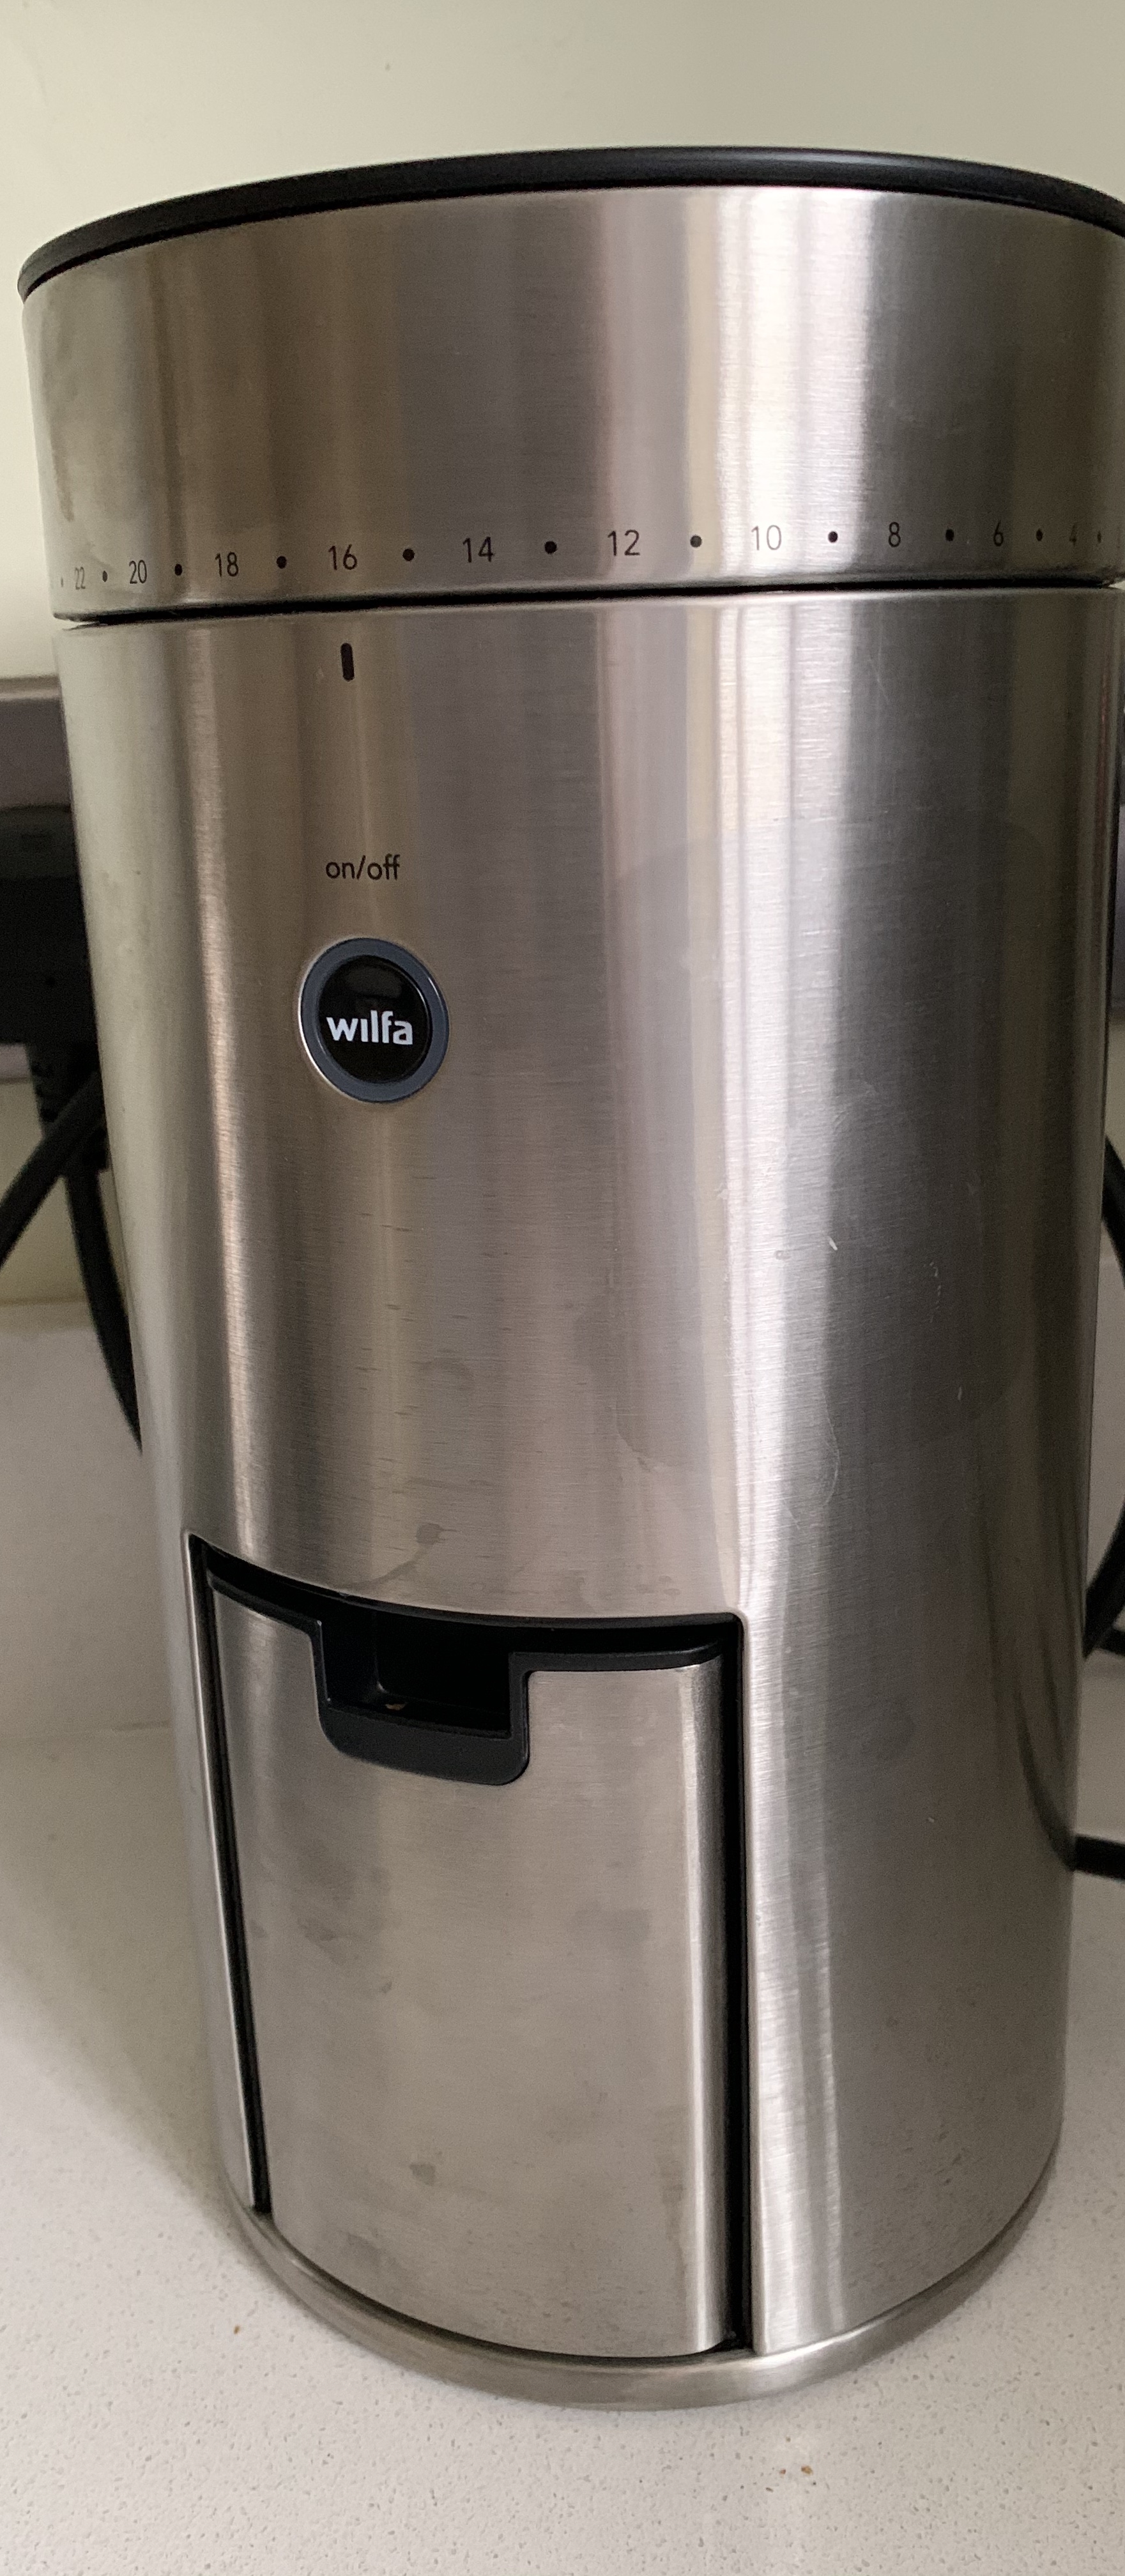 Our Wilfa Coffee Grinder Review – The Pros and Cons